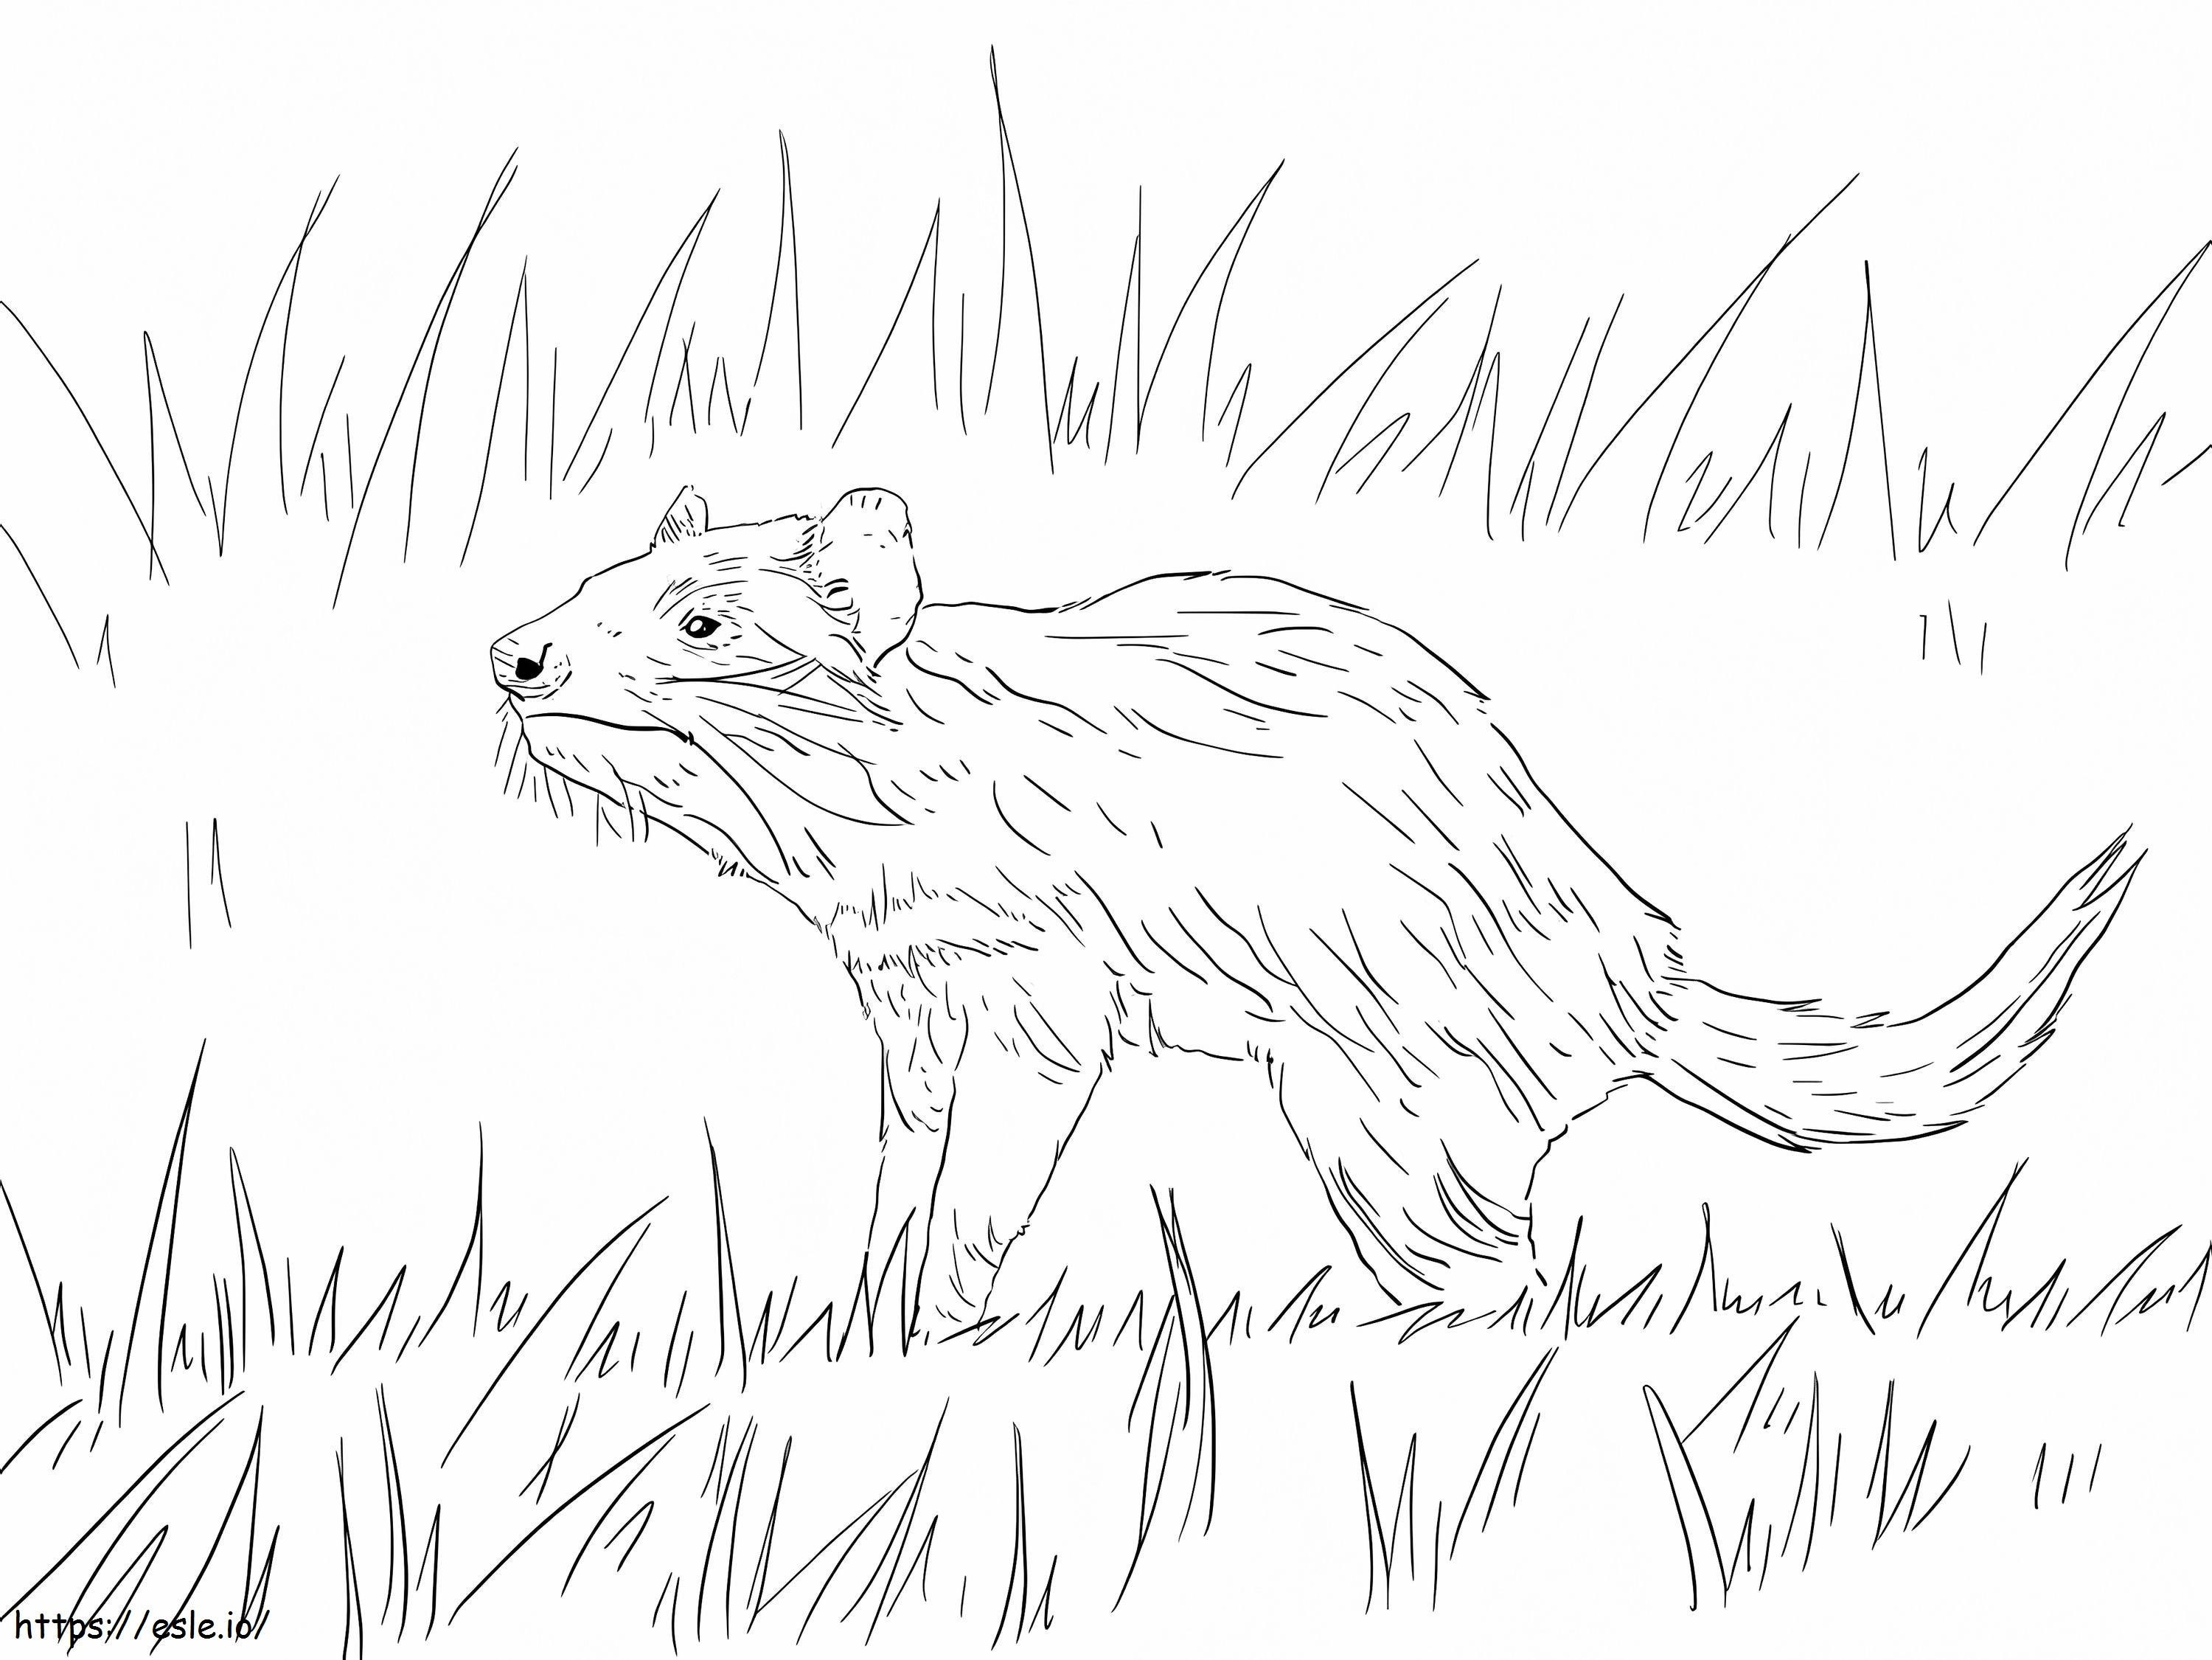 Tasmanian Devil On Grass coloring page